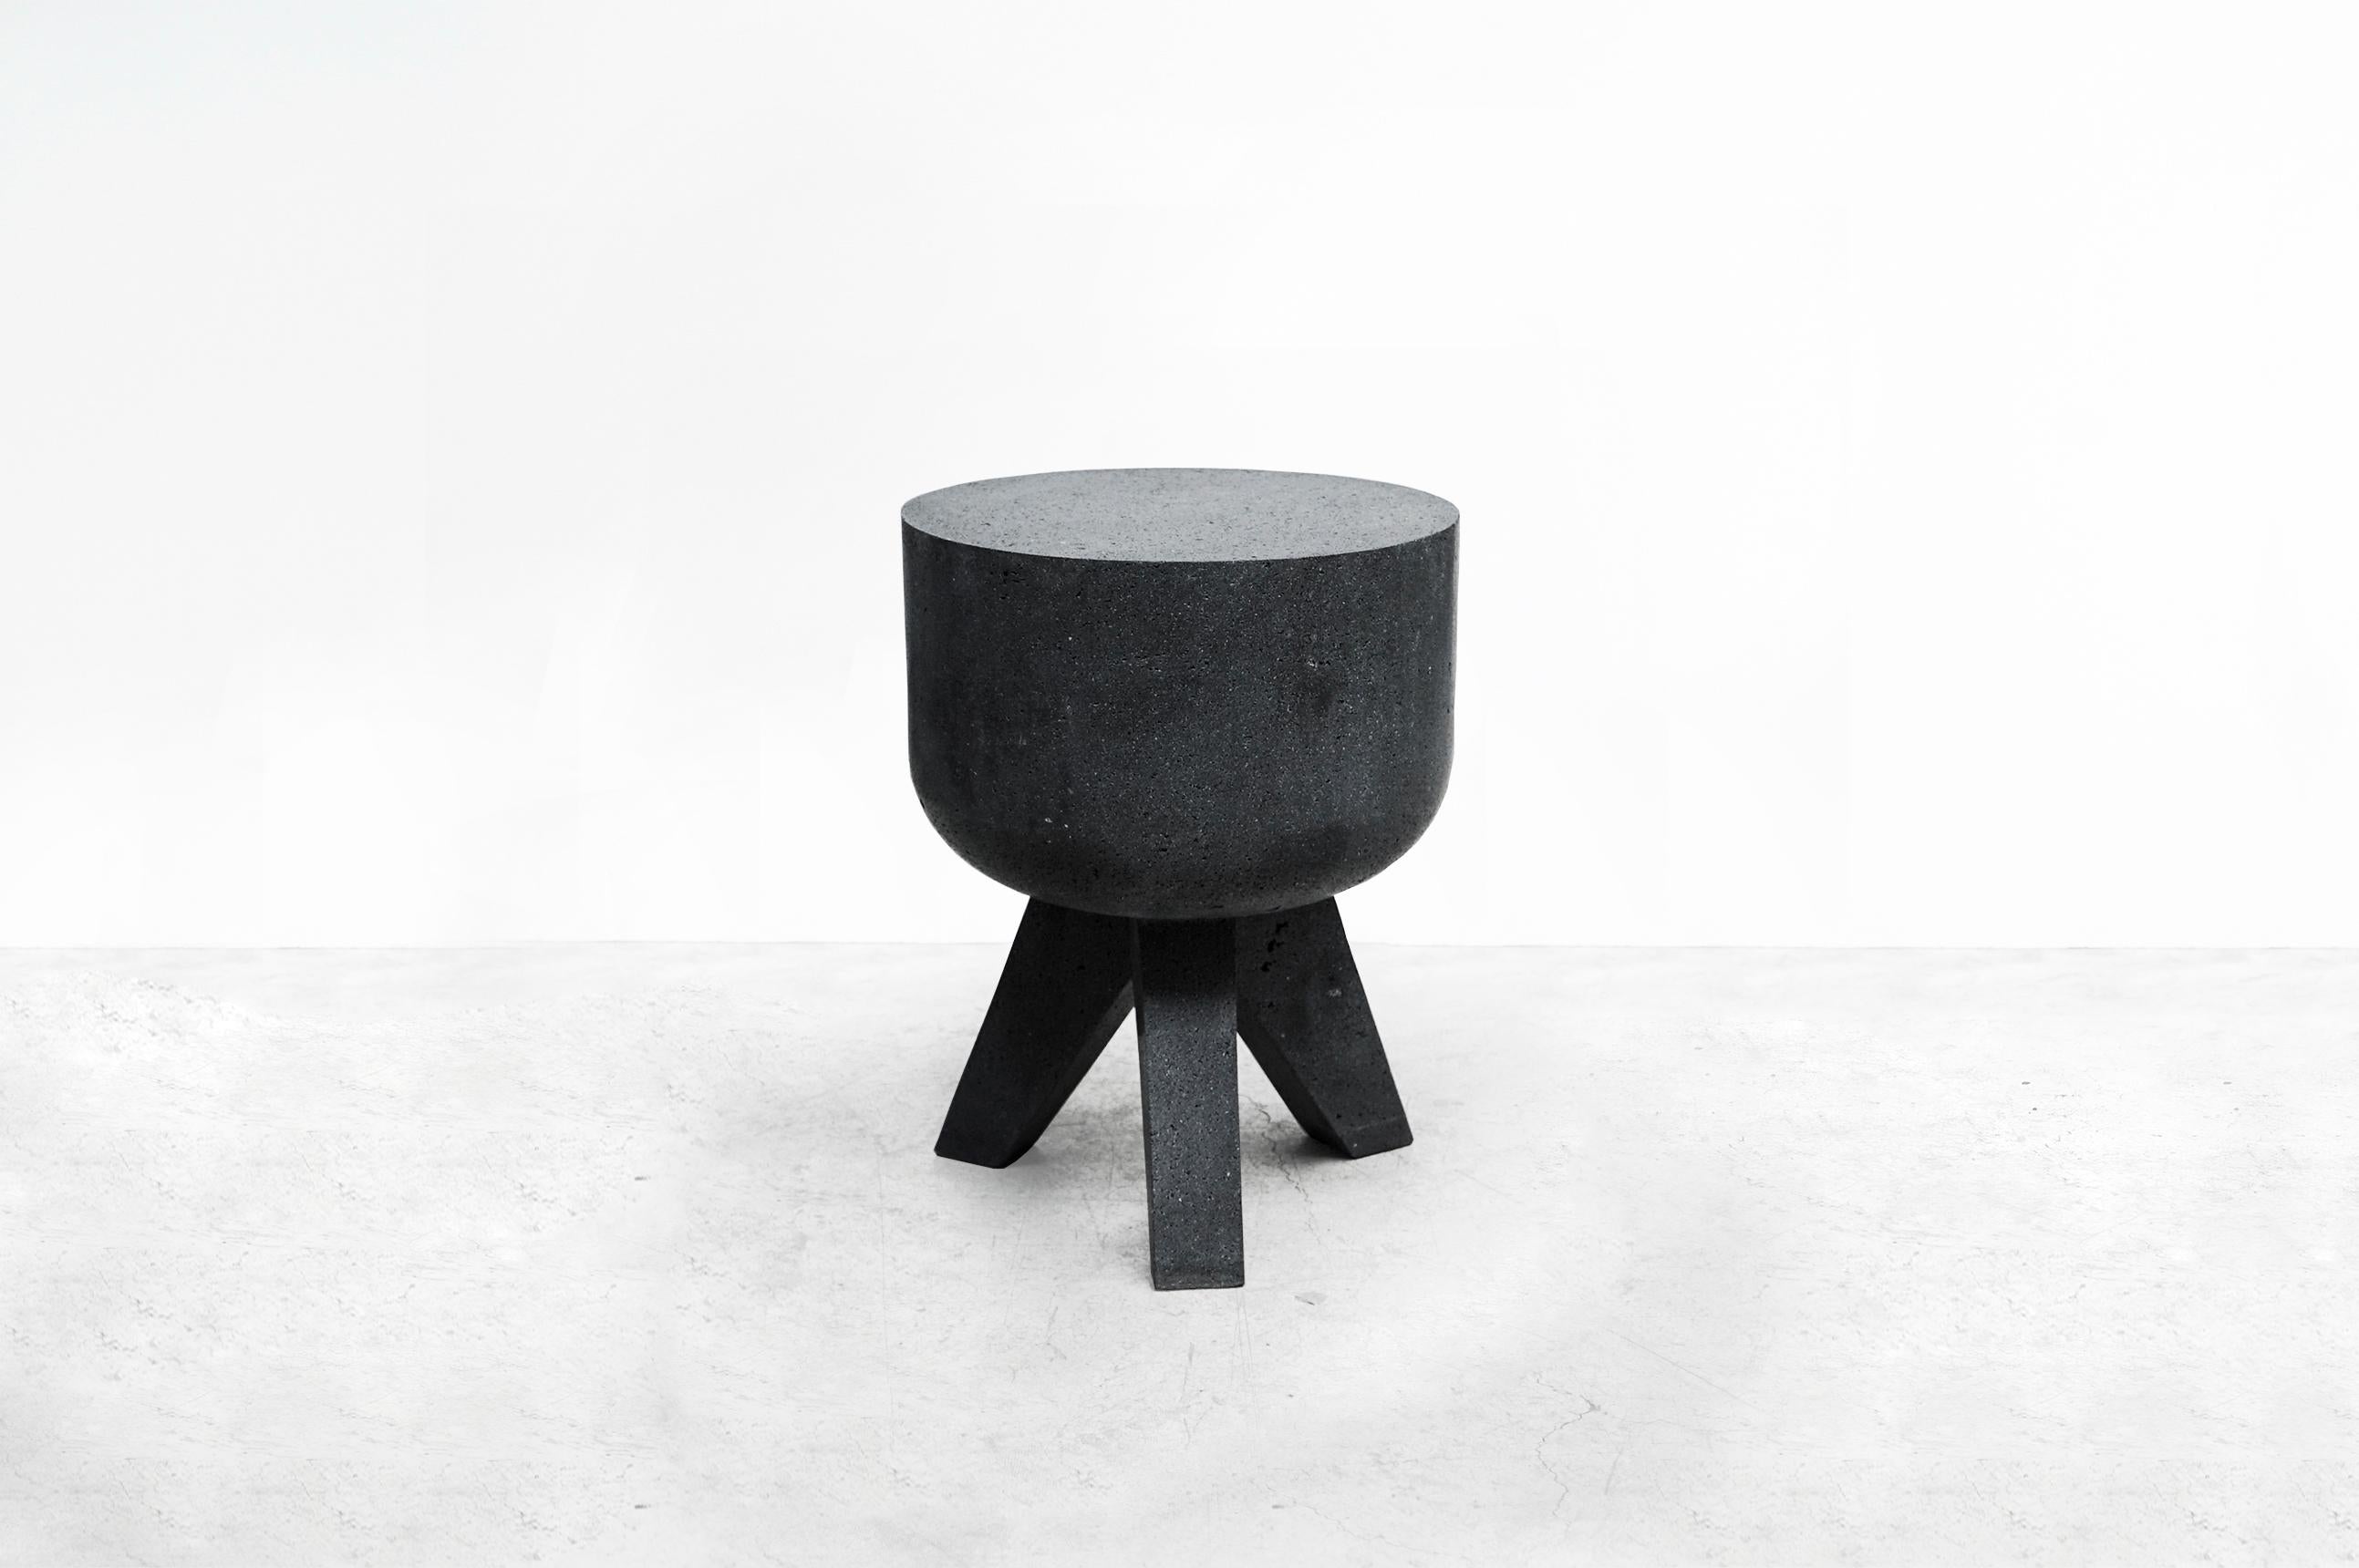 Tripod table
From Series Tripod
Manufactured by Pedro Reyes
Produced Exclusively for Side Gallery
Mexico, 2018.
Volcanic stone.